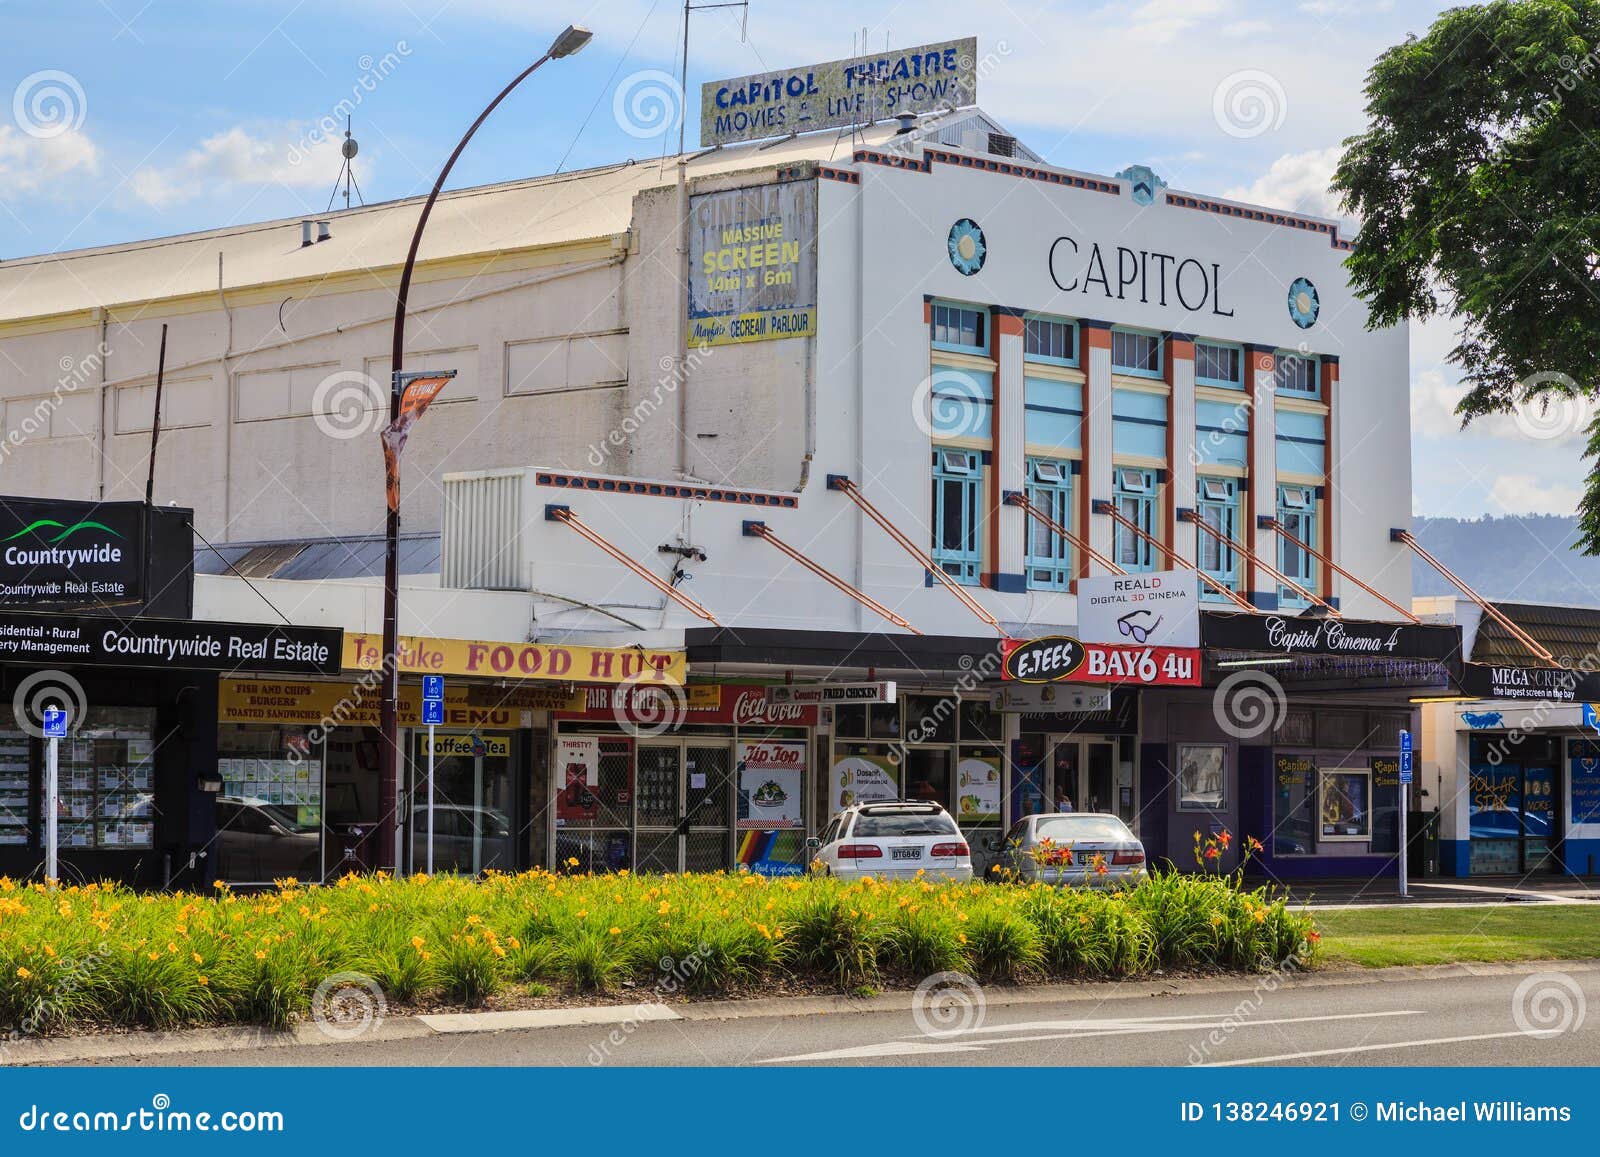 An Old Cinema Building In Te Puke New Zealand Editorial Photo Image Of Business Commercial